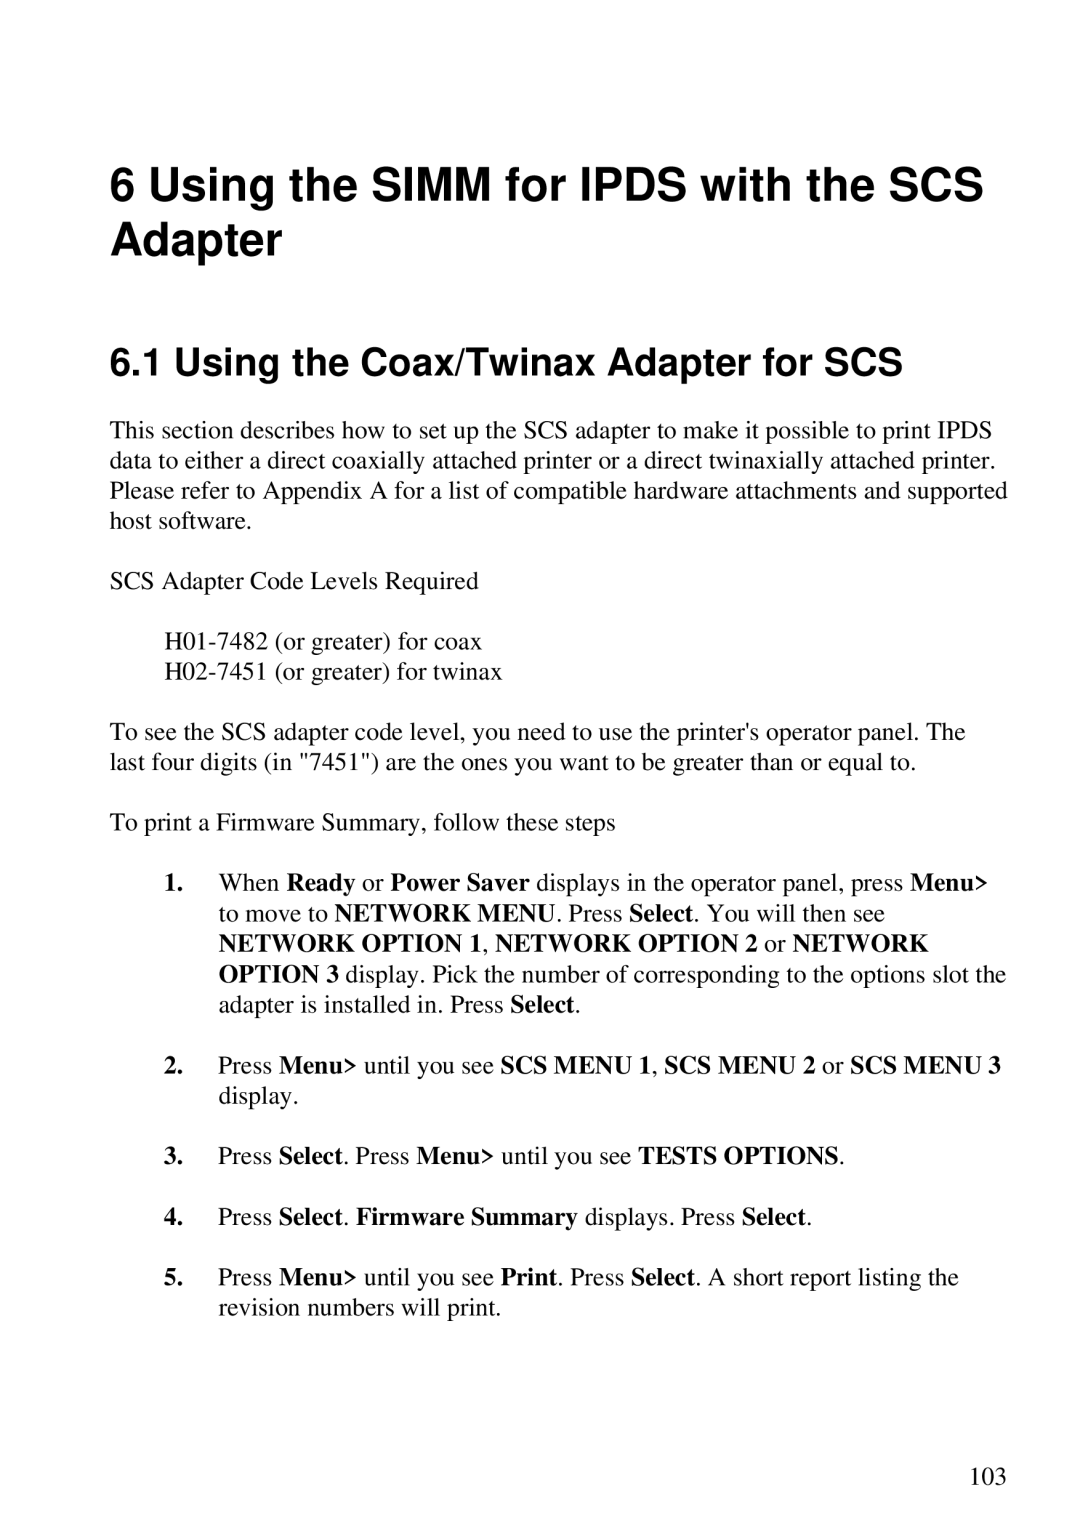 Lexmark Se 3455, K 1220 manual Using the Coax/Twinax Adapter for SCS, Press Select. Firmware Summary displays. Press Select 